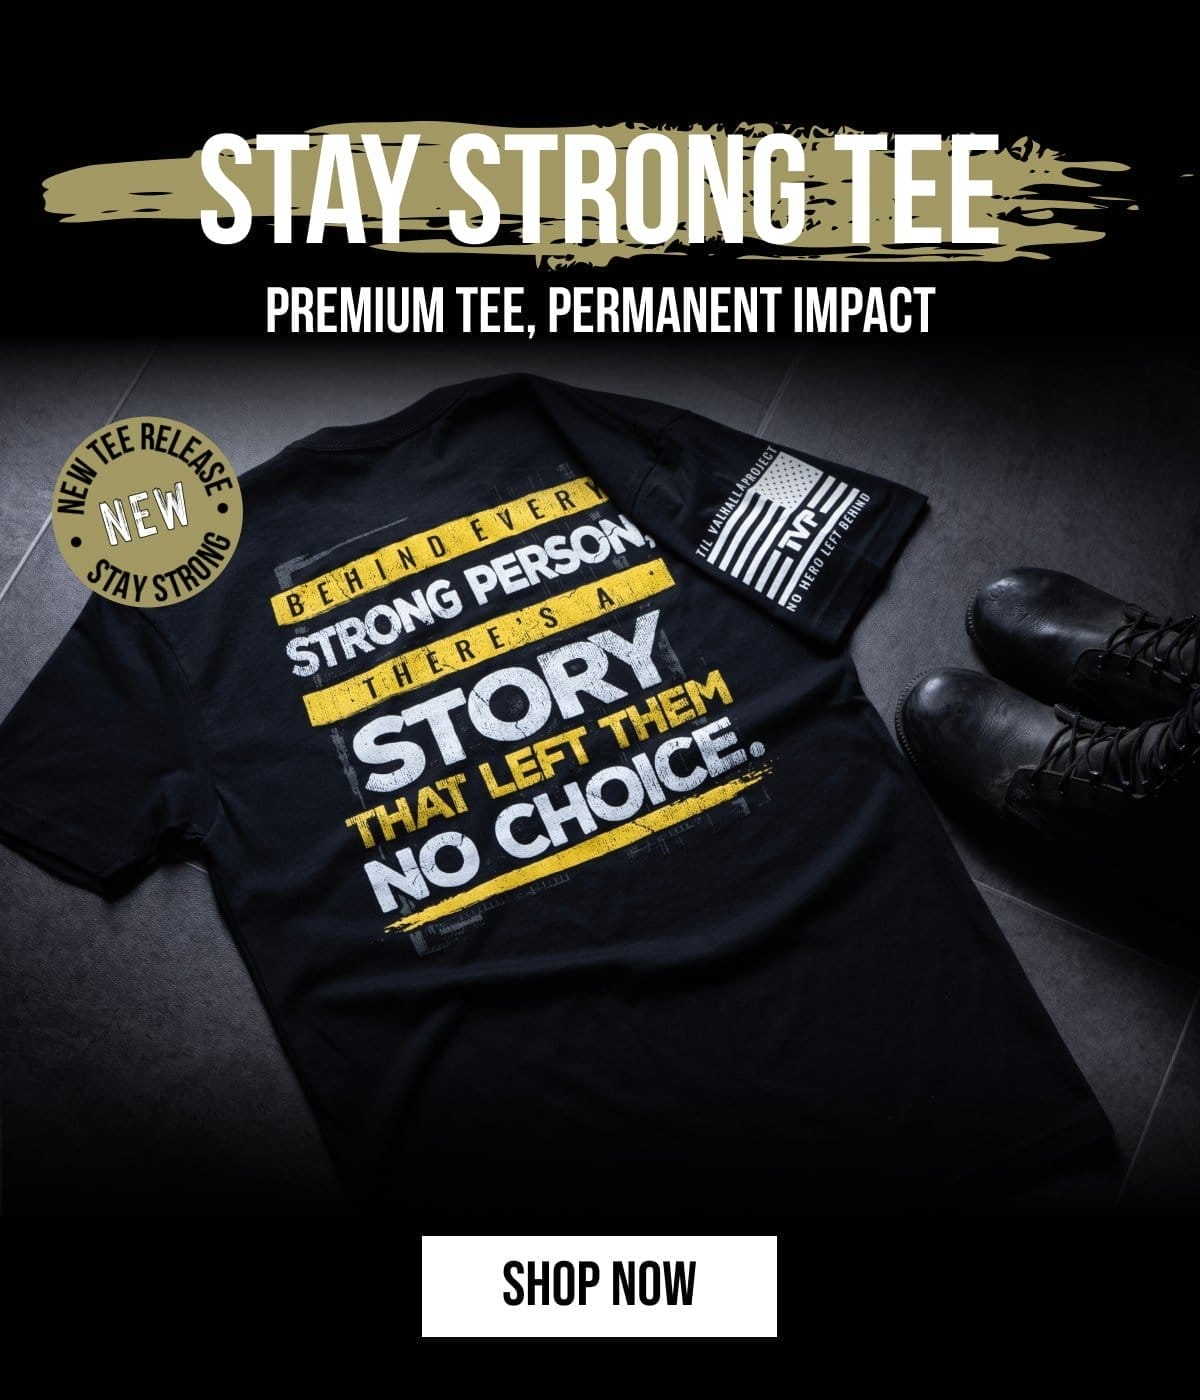 STAY STRONG TEE Premium Tee, Permanent Impact